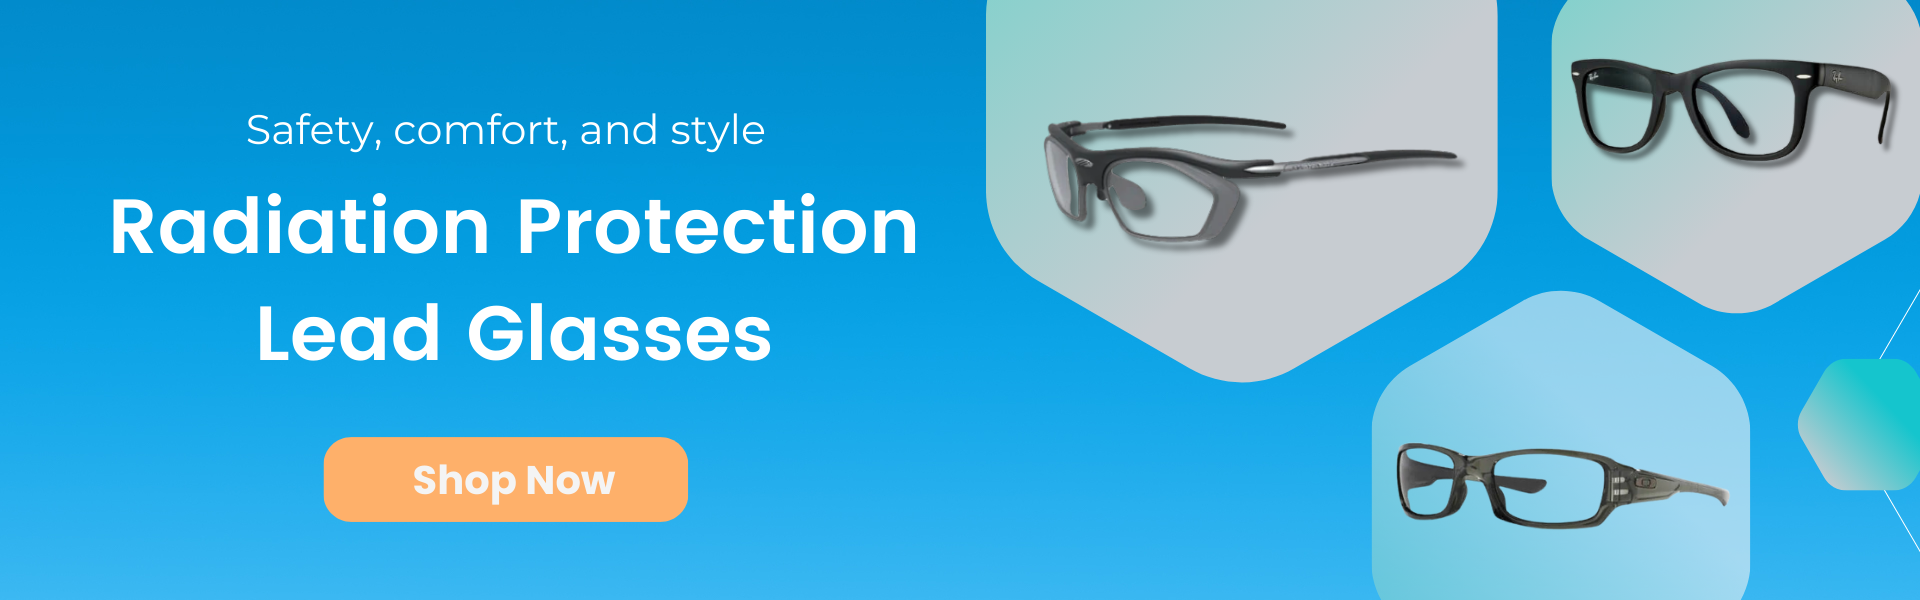 Safety, comfort, and style - Radiation protection lead glasses